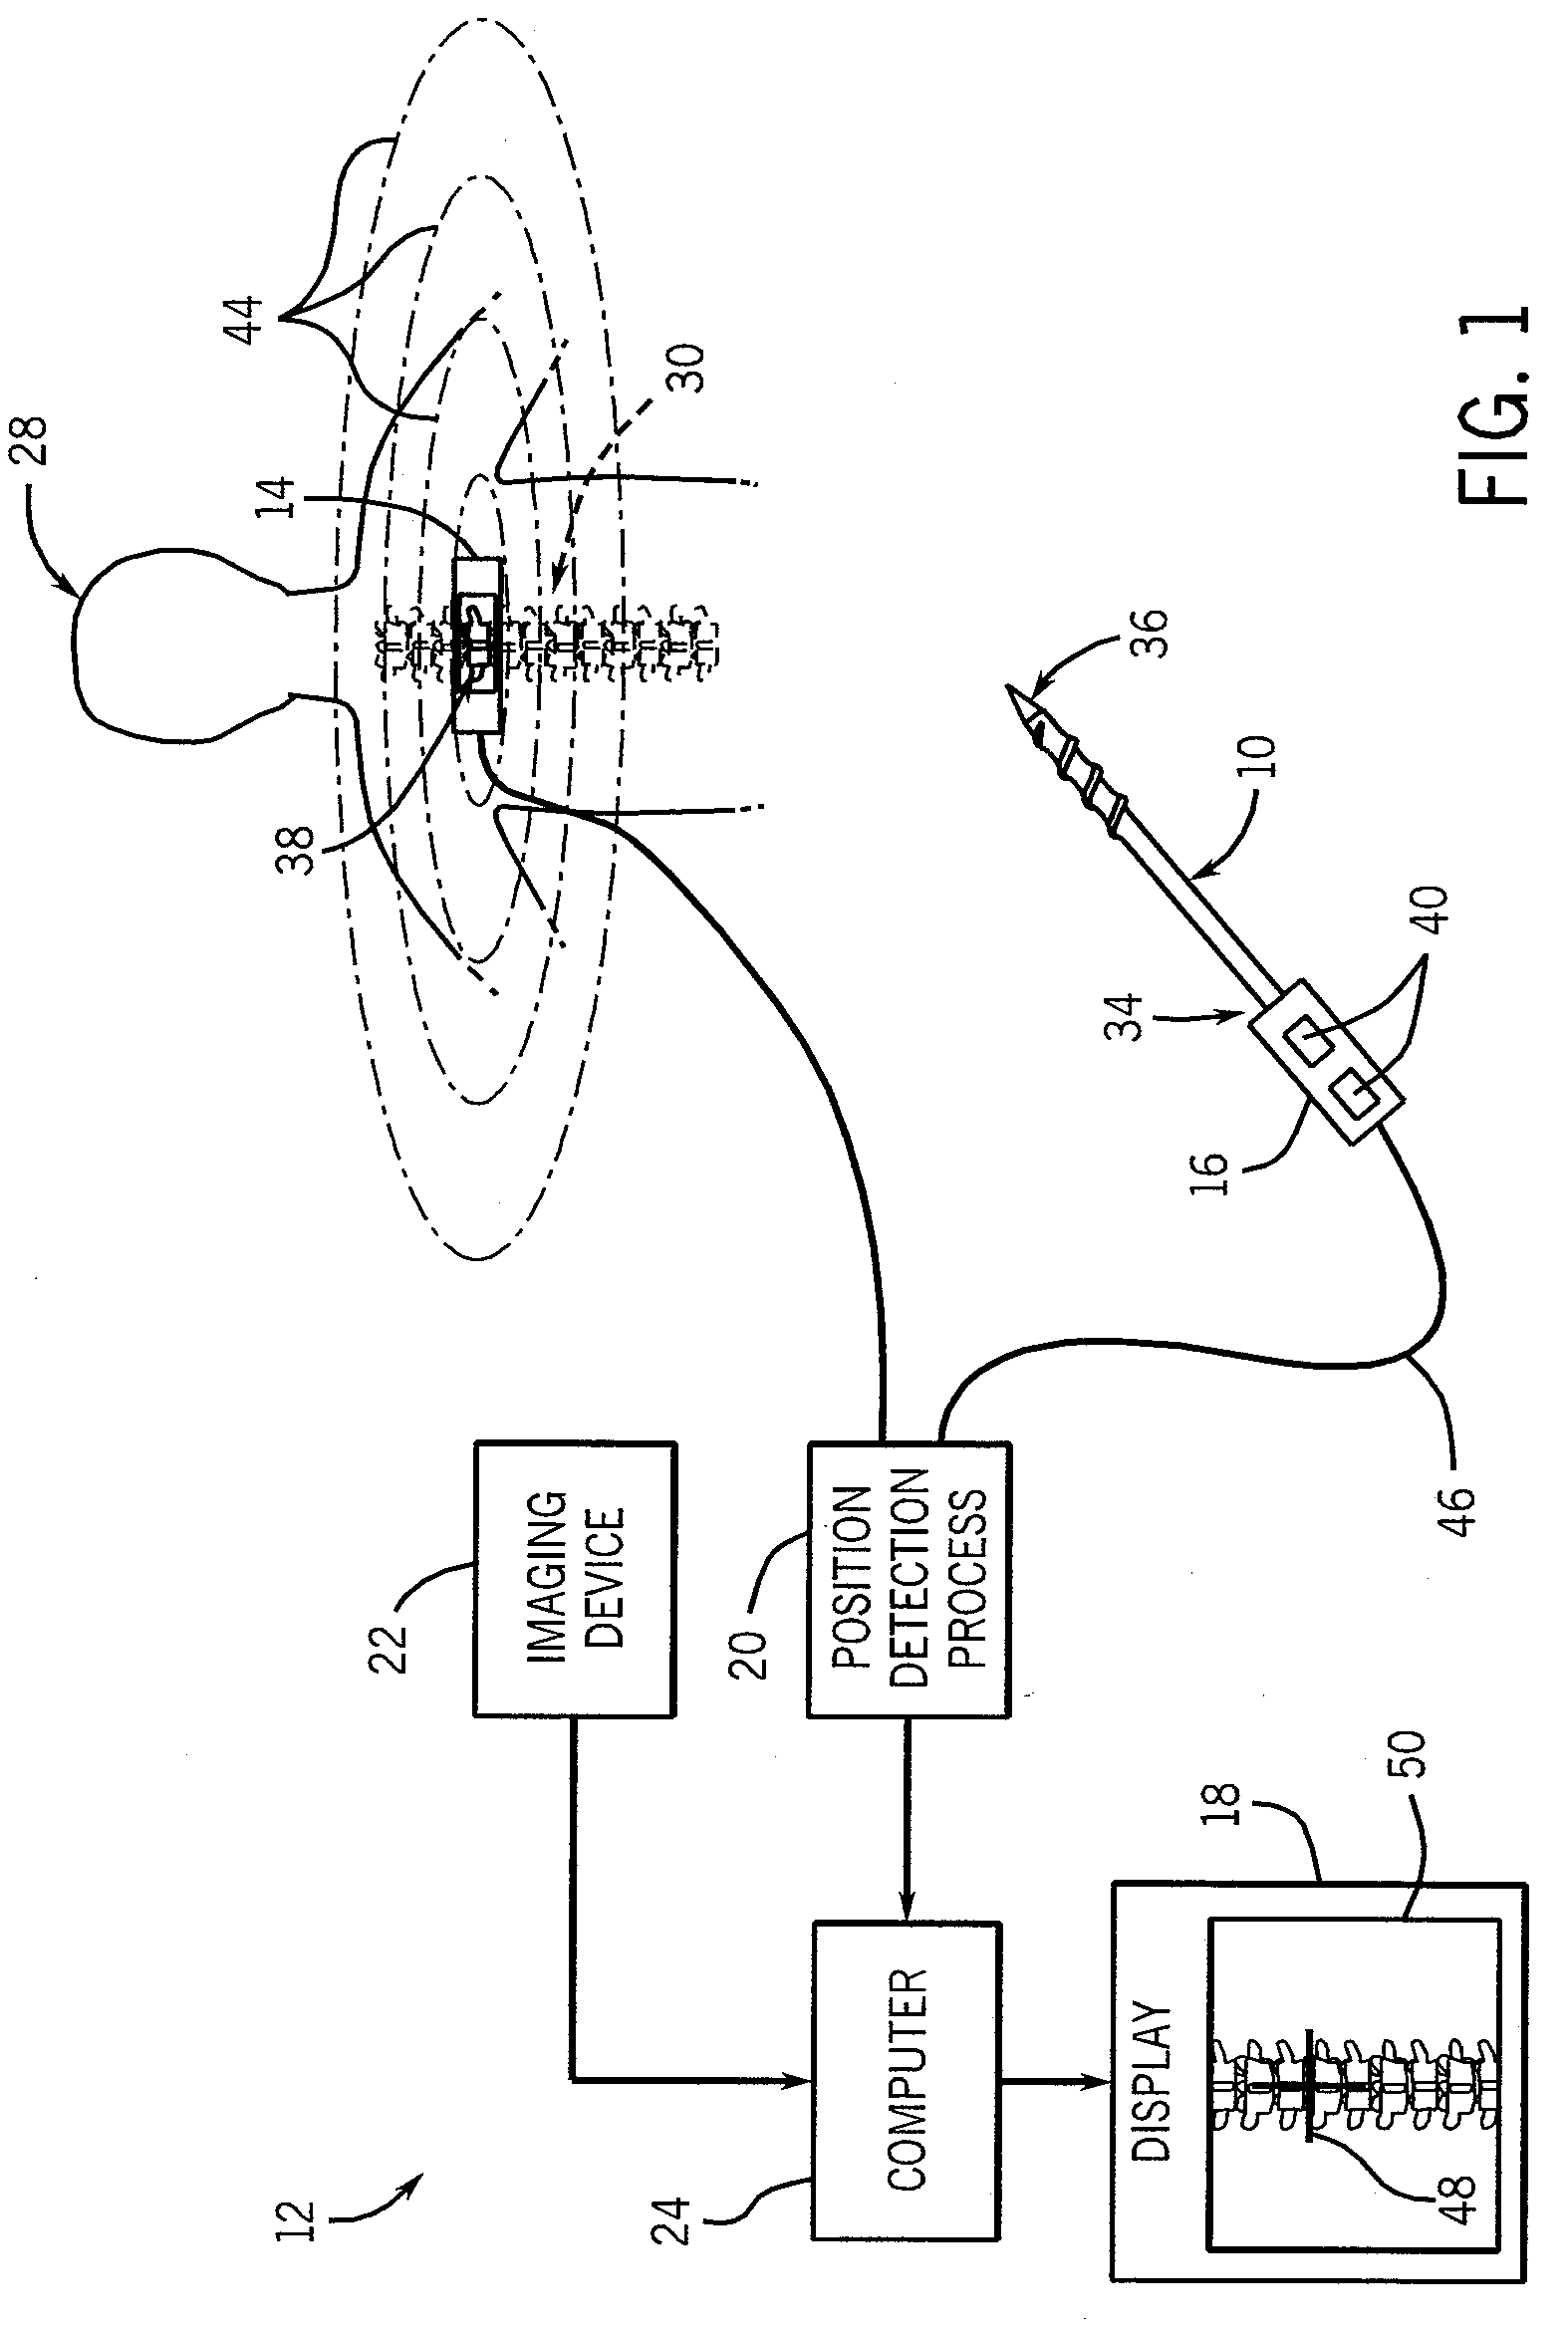 Method and apparatus for performing pedicle screw fusion surgery